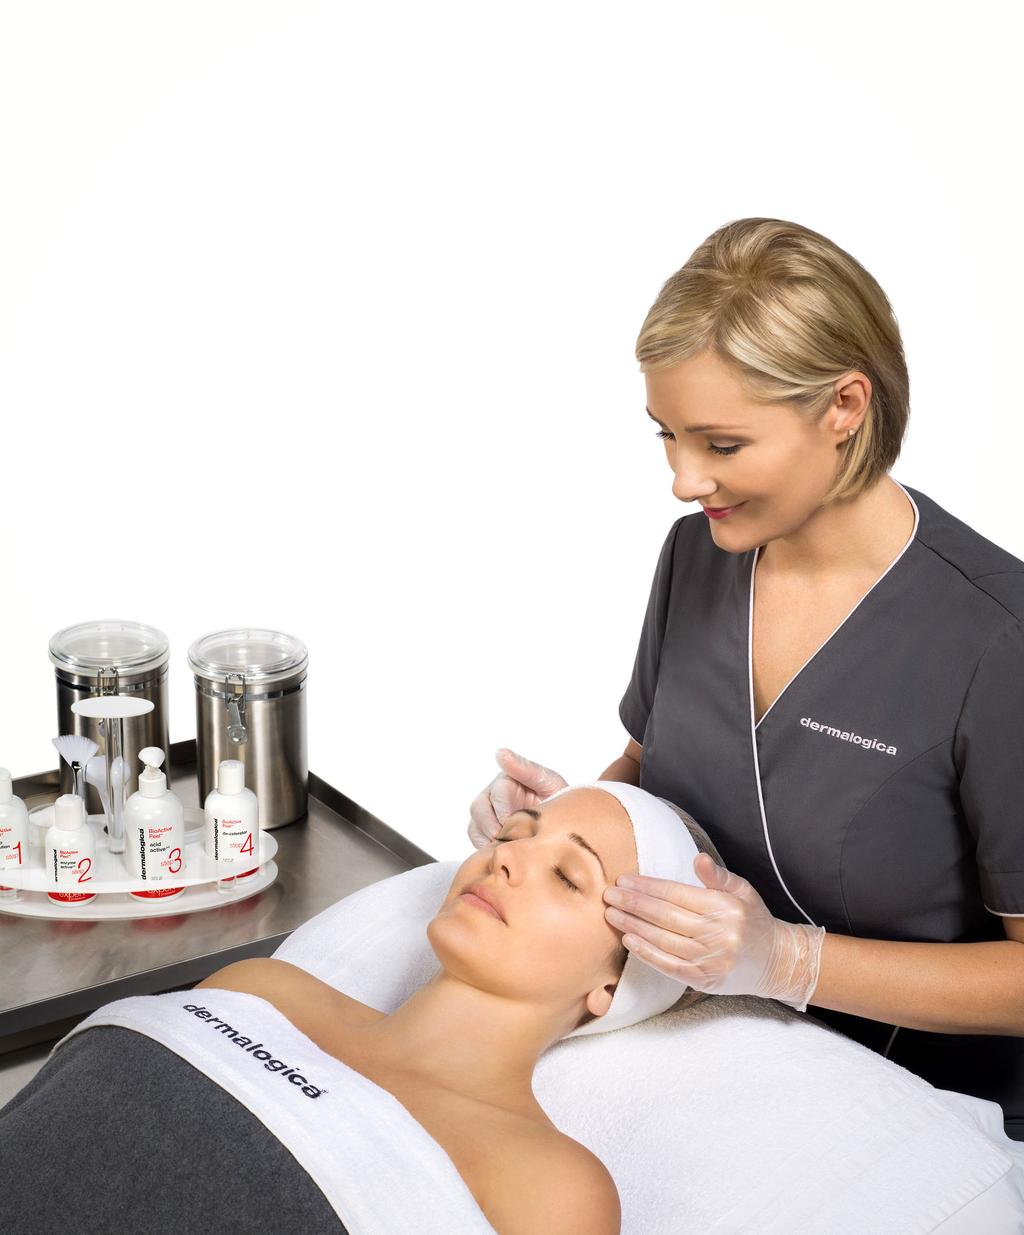 biosurface peel treatment workshop This one-day theory and practical workshop will explore the latest information on skin exfoliation, peel categories and depth, how Dermalogica s new formulas go